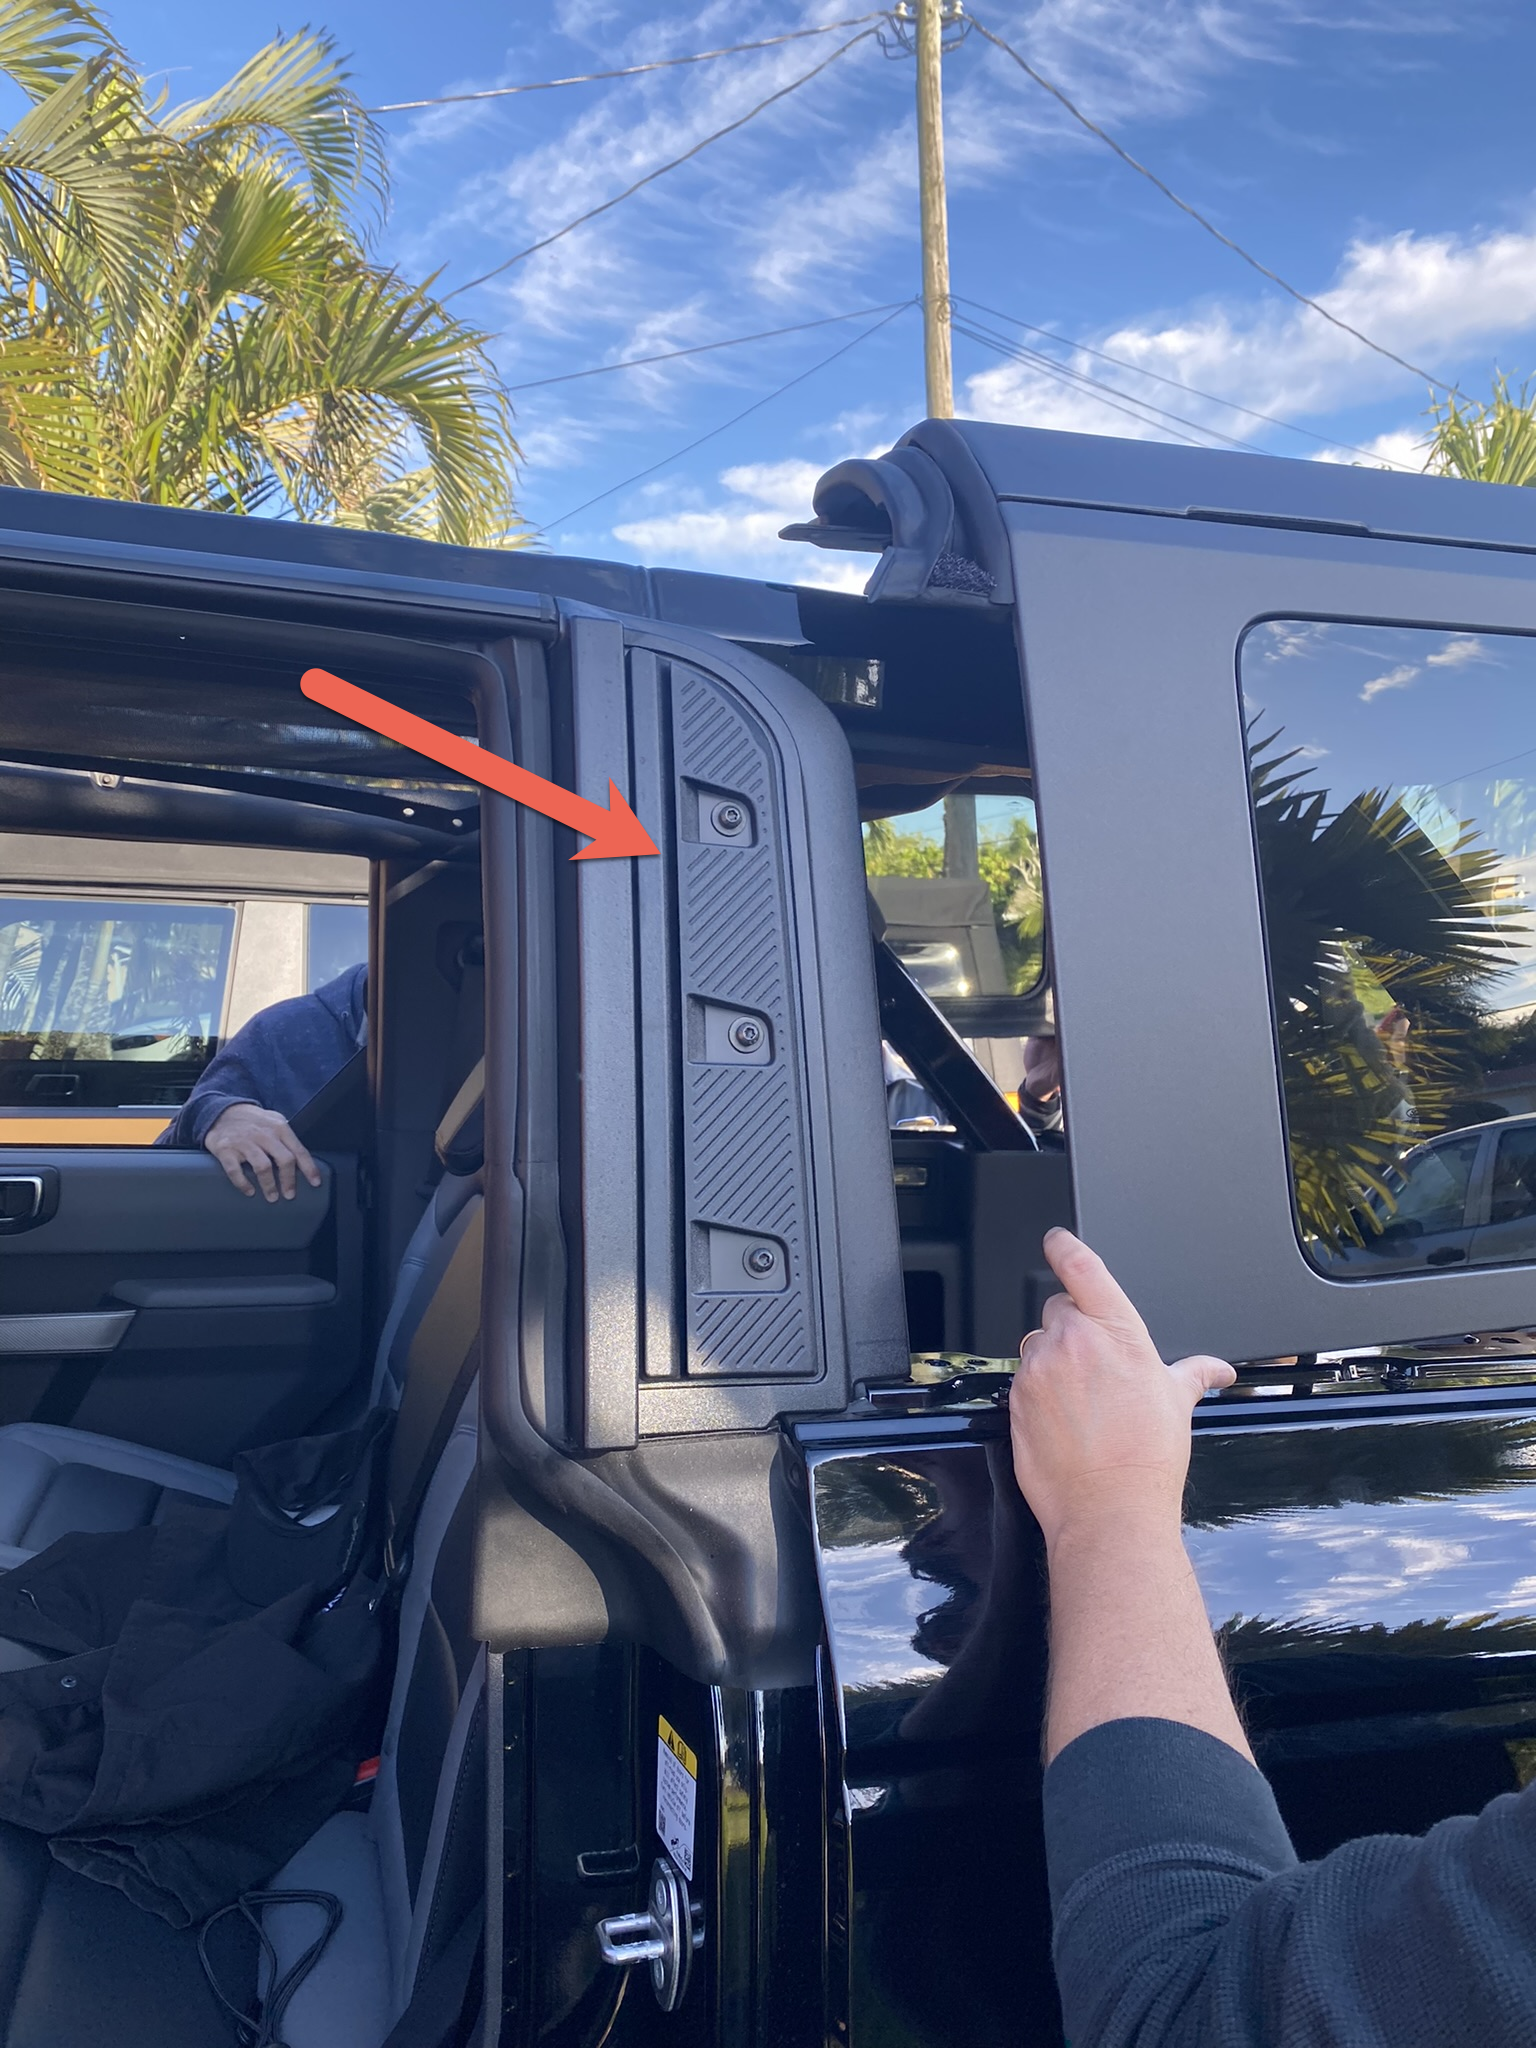 Ford Bronco Soft Top <--> Hard Top Swap : Tips & Lessons Learned - UPDATED 4CEAEC6B-F5C4-4D9E-852A-D96A3018E108